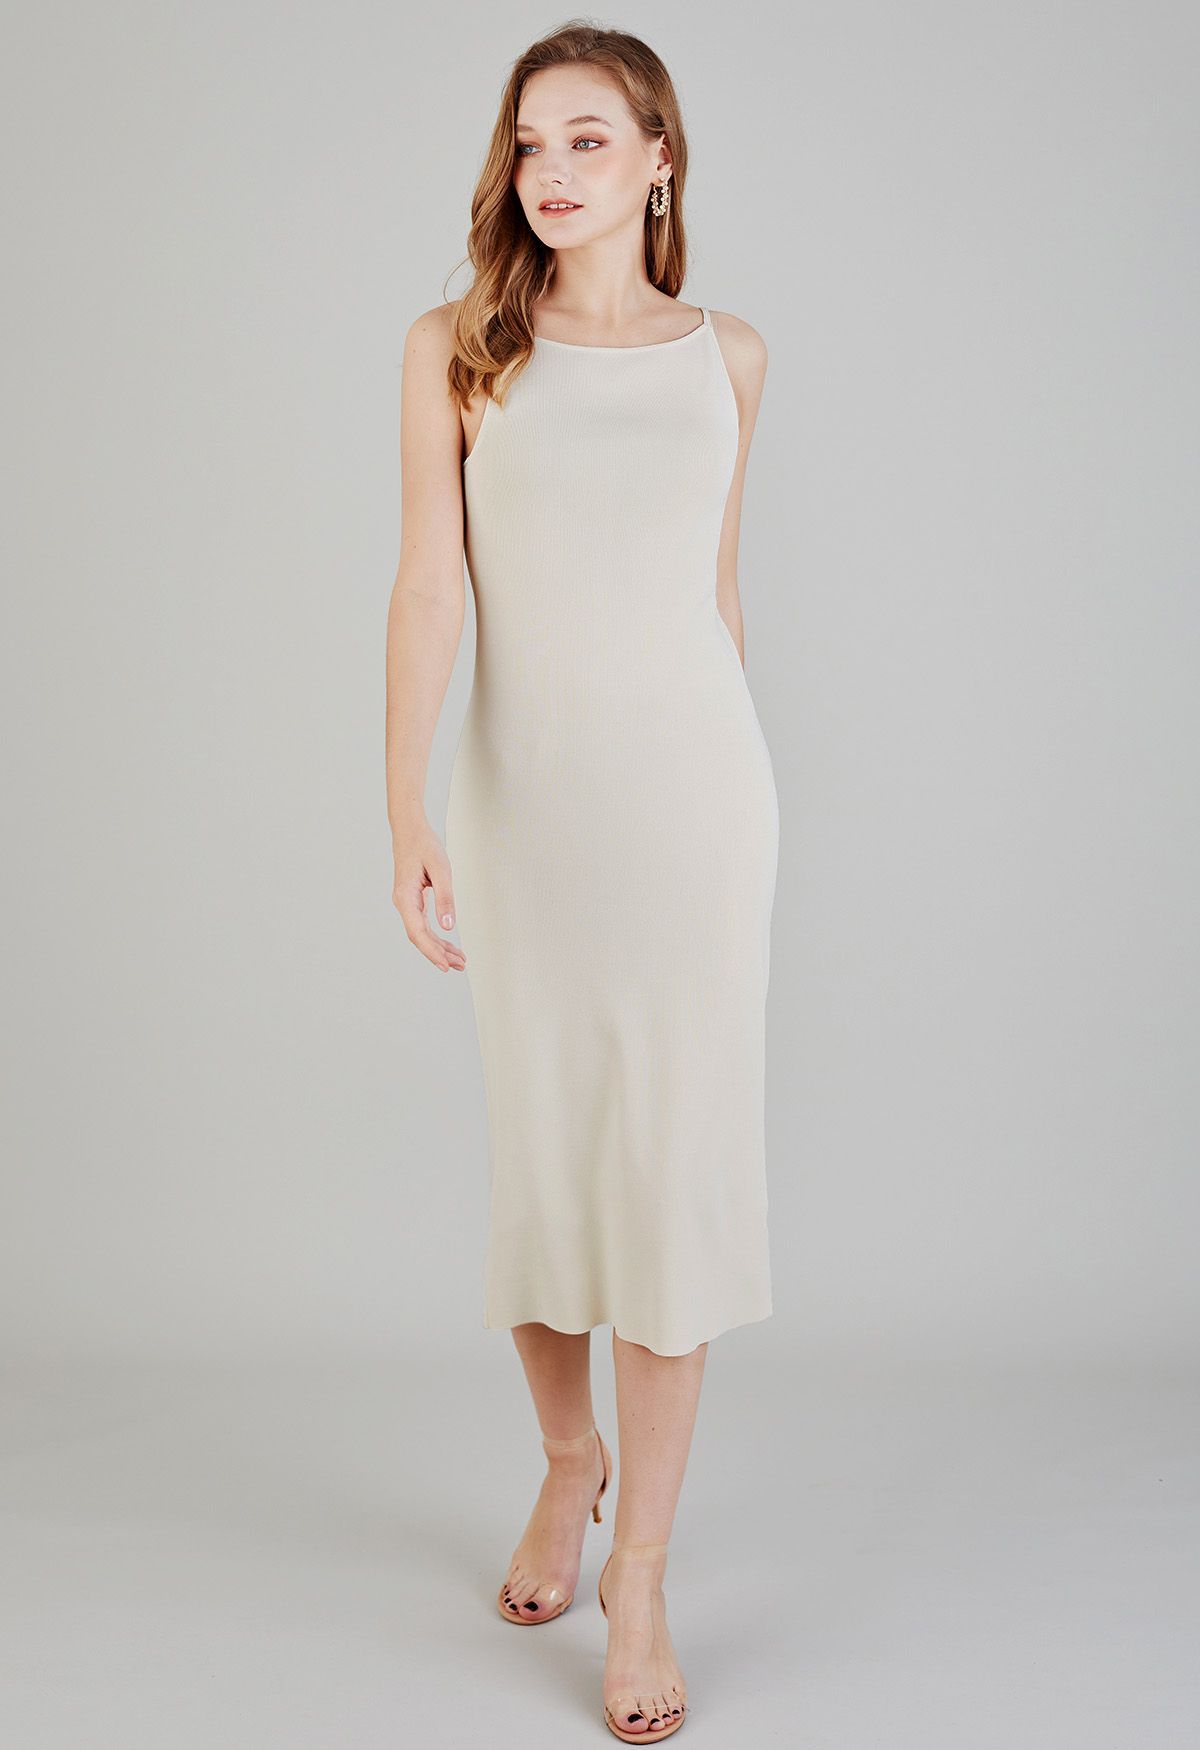 Ode to Simplicity Knit Cami Dress in Ivory | Chicwish